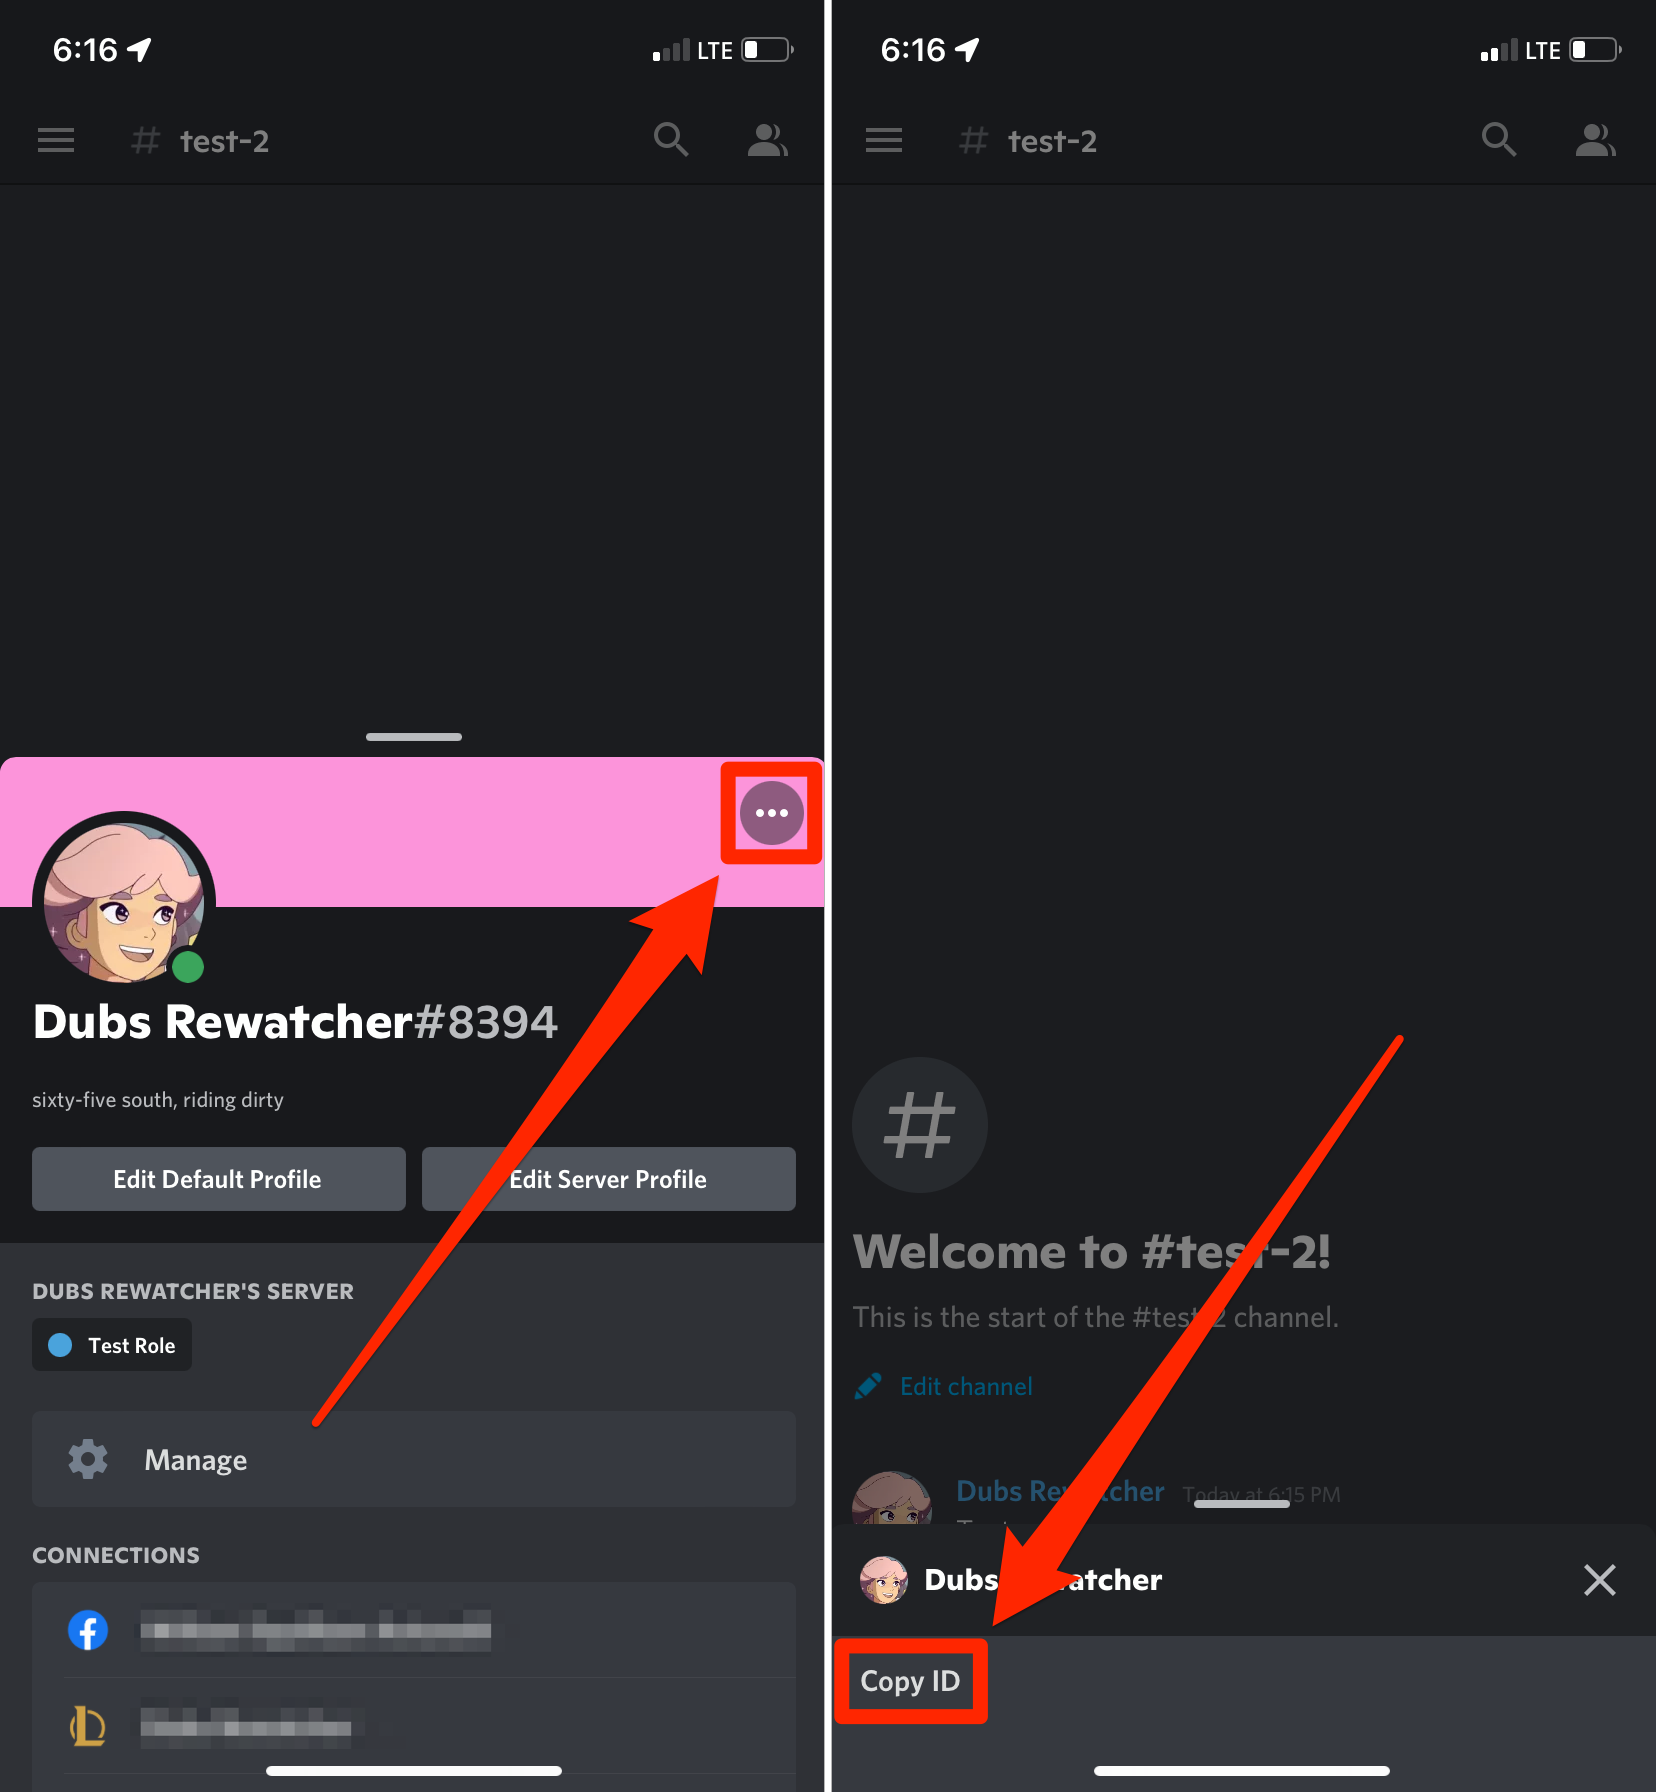 The process to copy a Discord user's ID in the Discord mobile app.